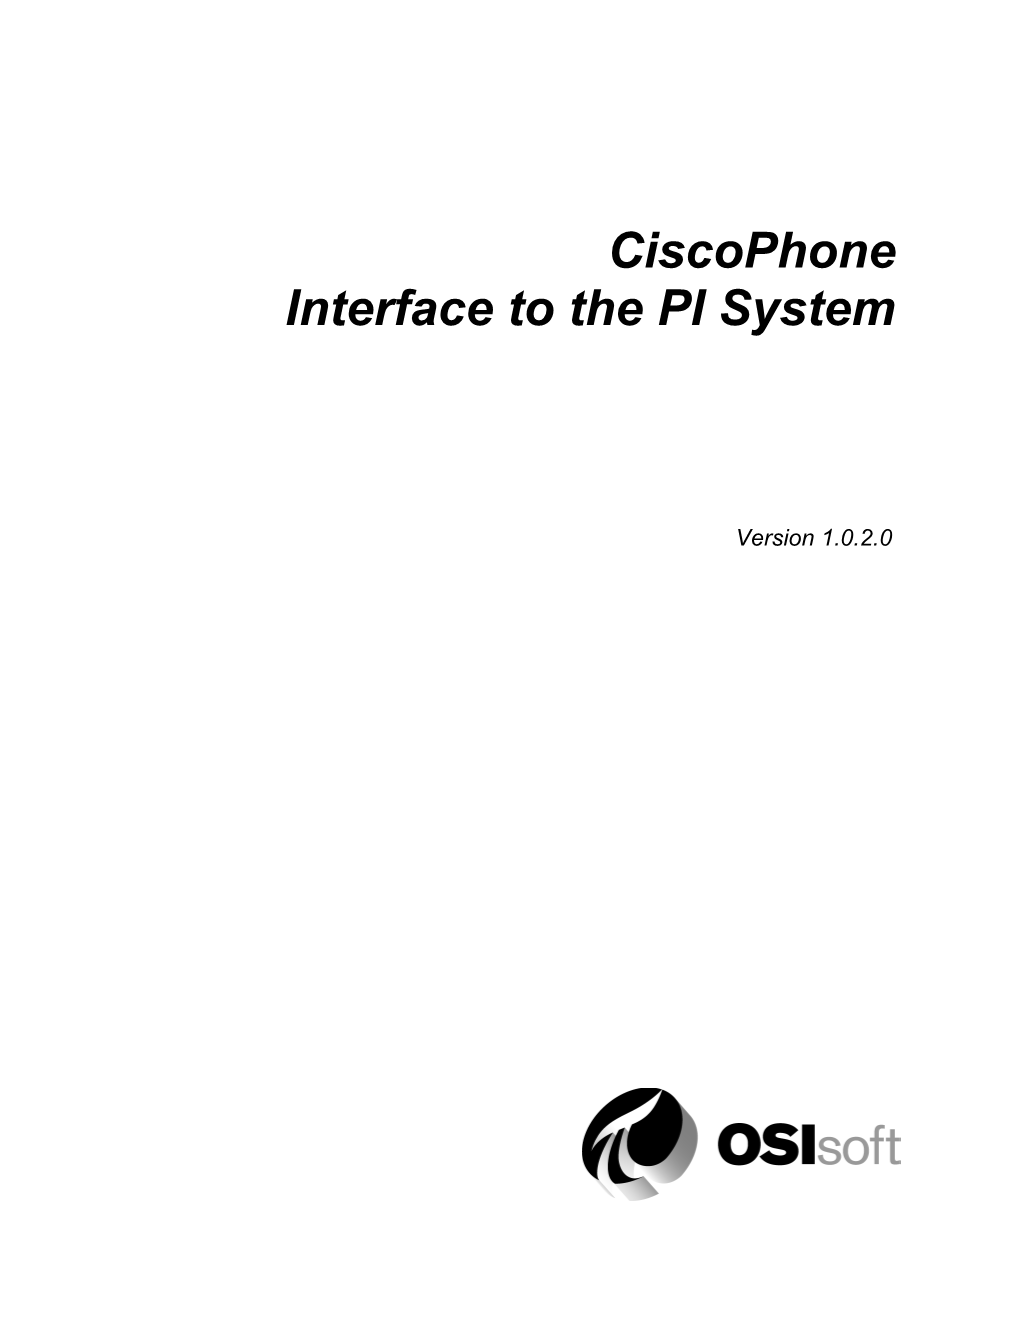 Ciscophone Interface to the PI System